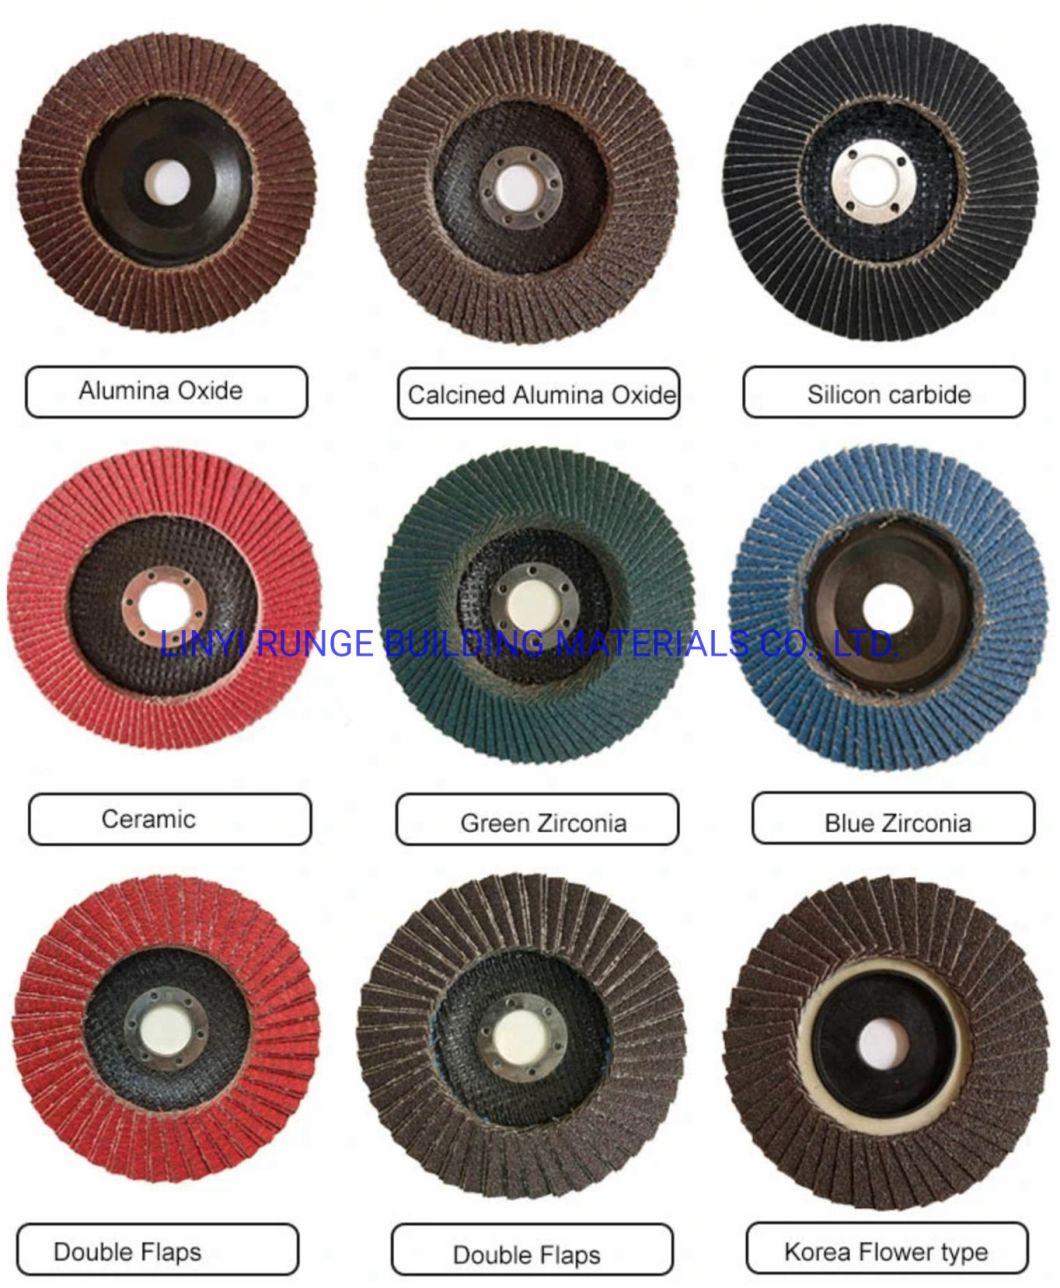 Long Life 14-Inch Cut-off Wheel Cutting Disc for Metals Steel Iron Brass Various Famous Angle Grinder Power Tools